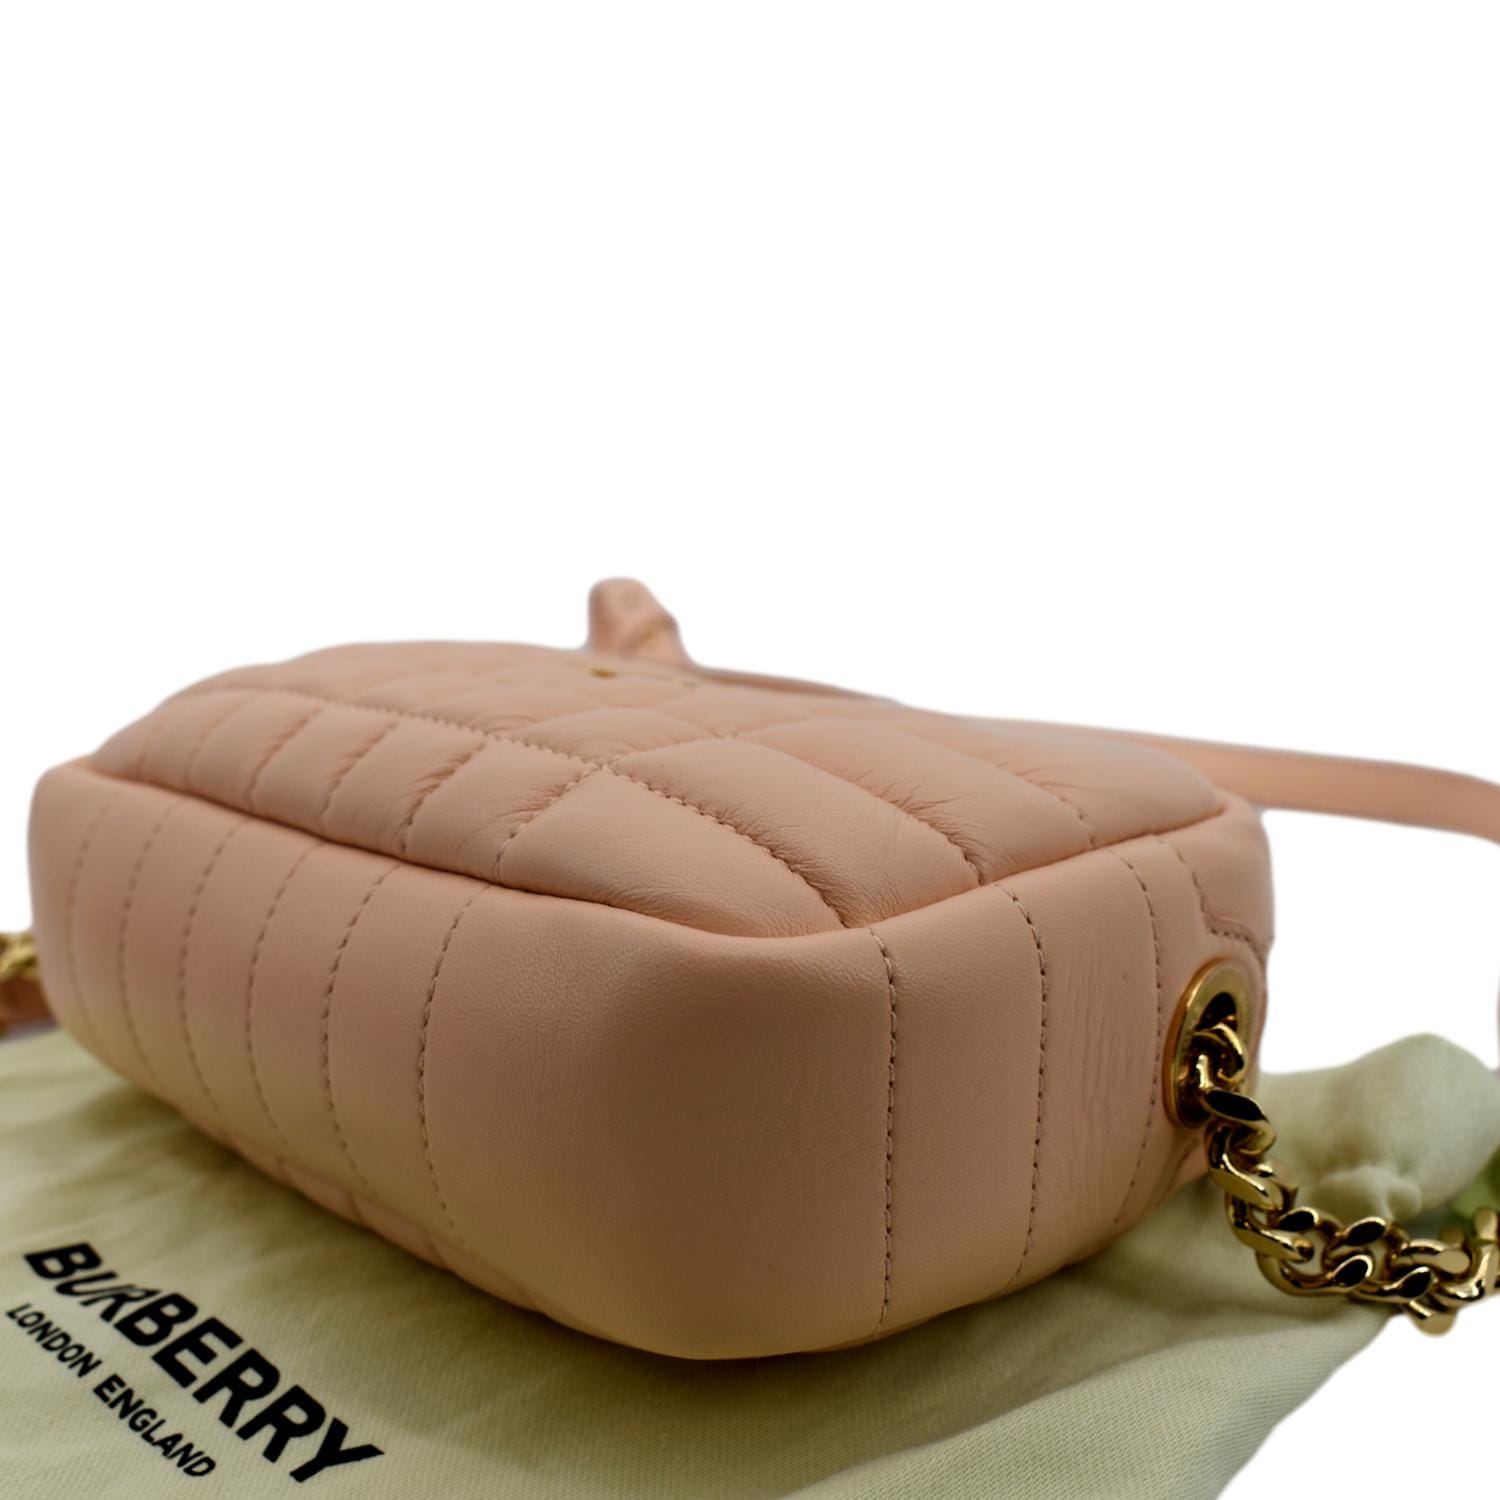 BEIGE BURBERRY QUILTED LEATHER MINI 'LOLA' CAMERA BAG (8063025